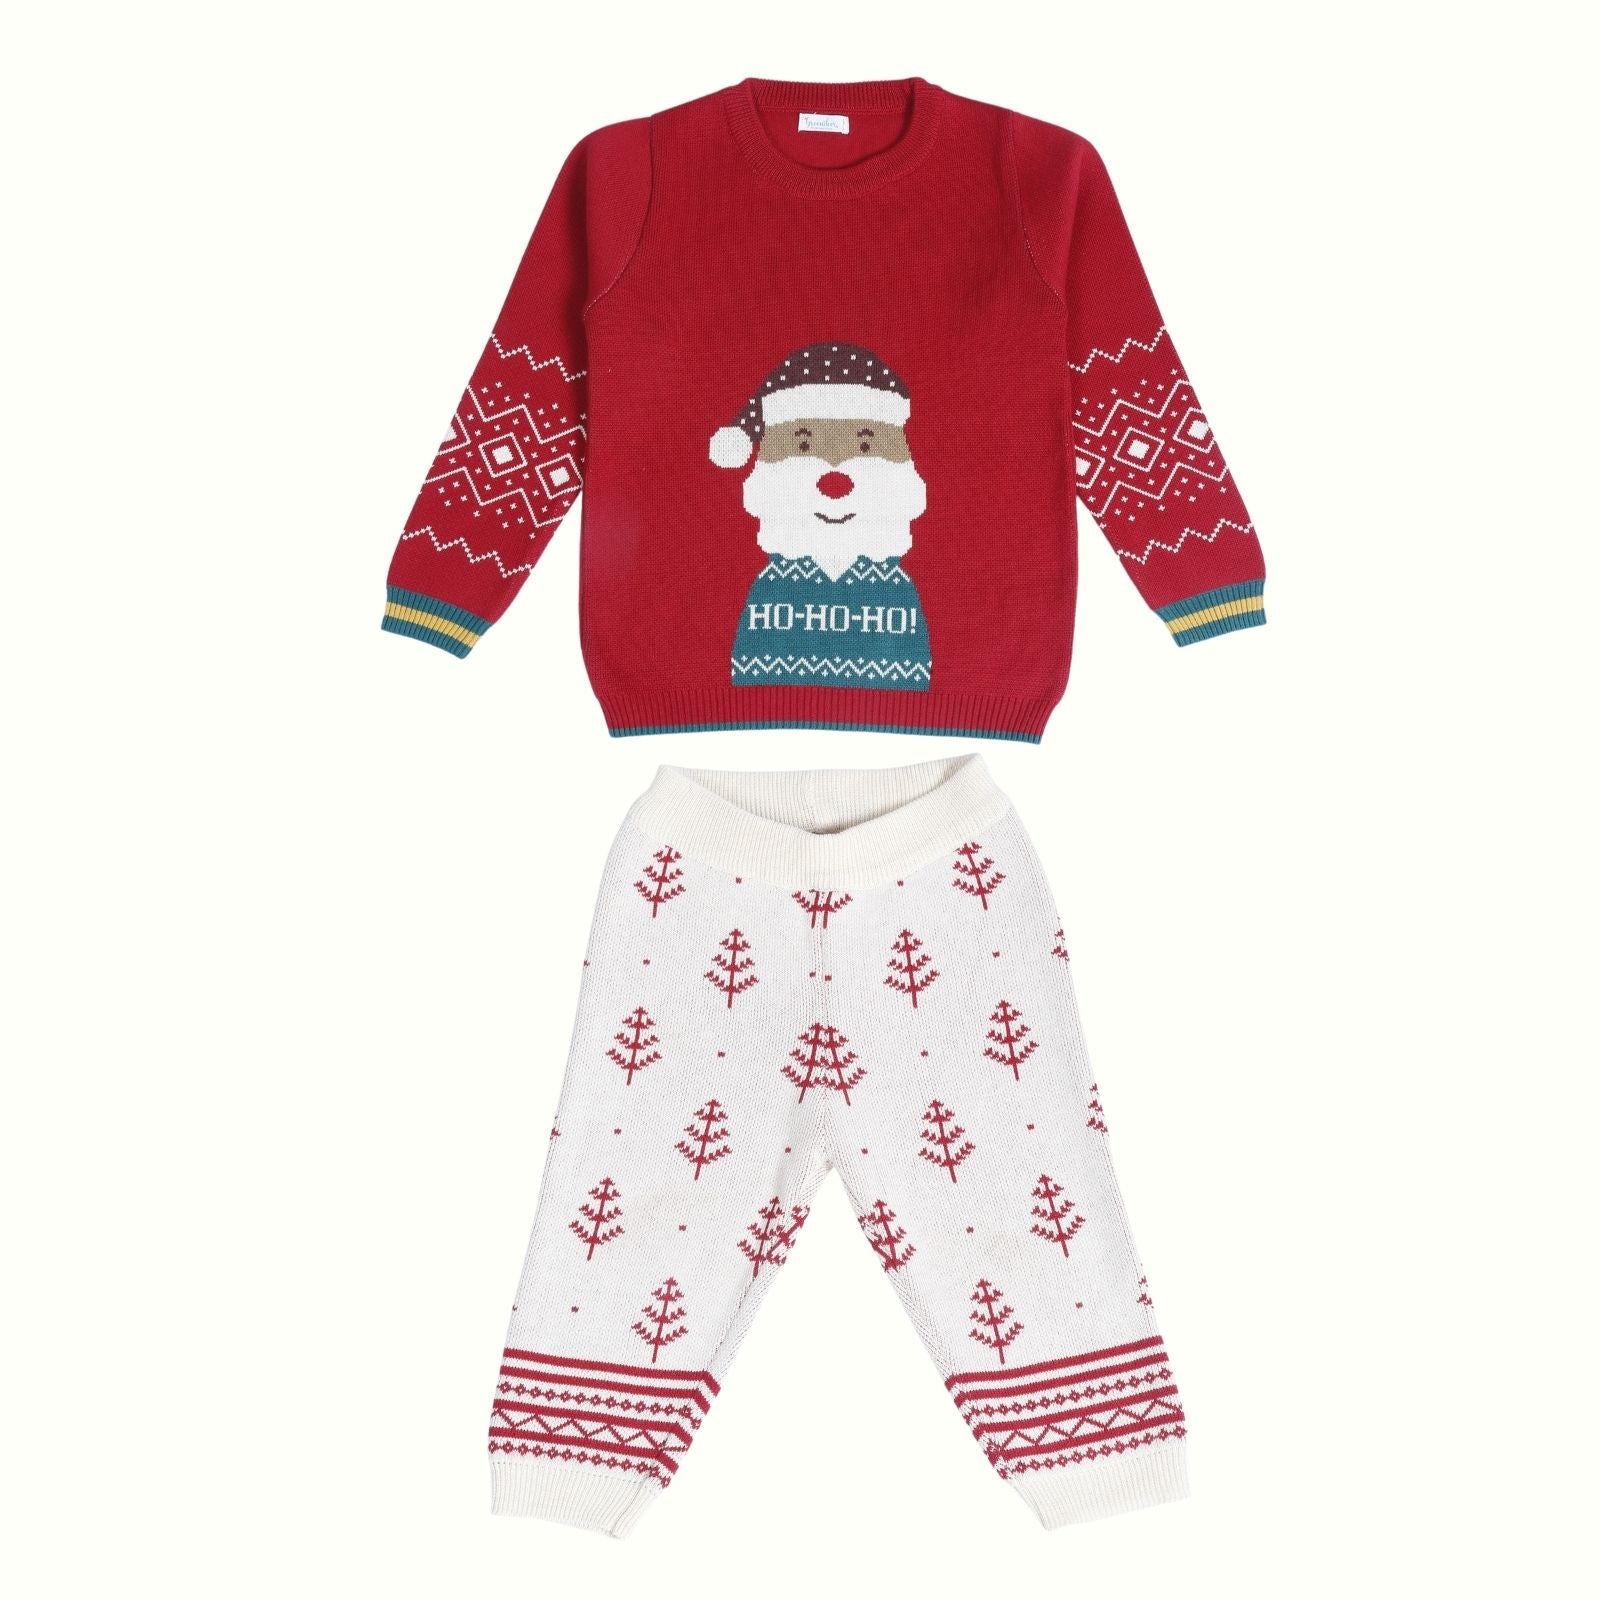 Greendeer Santa Jacquard 100% Cotton Sweater with Lower - Crème & Cherry Red - Set of 2